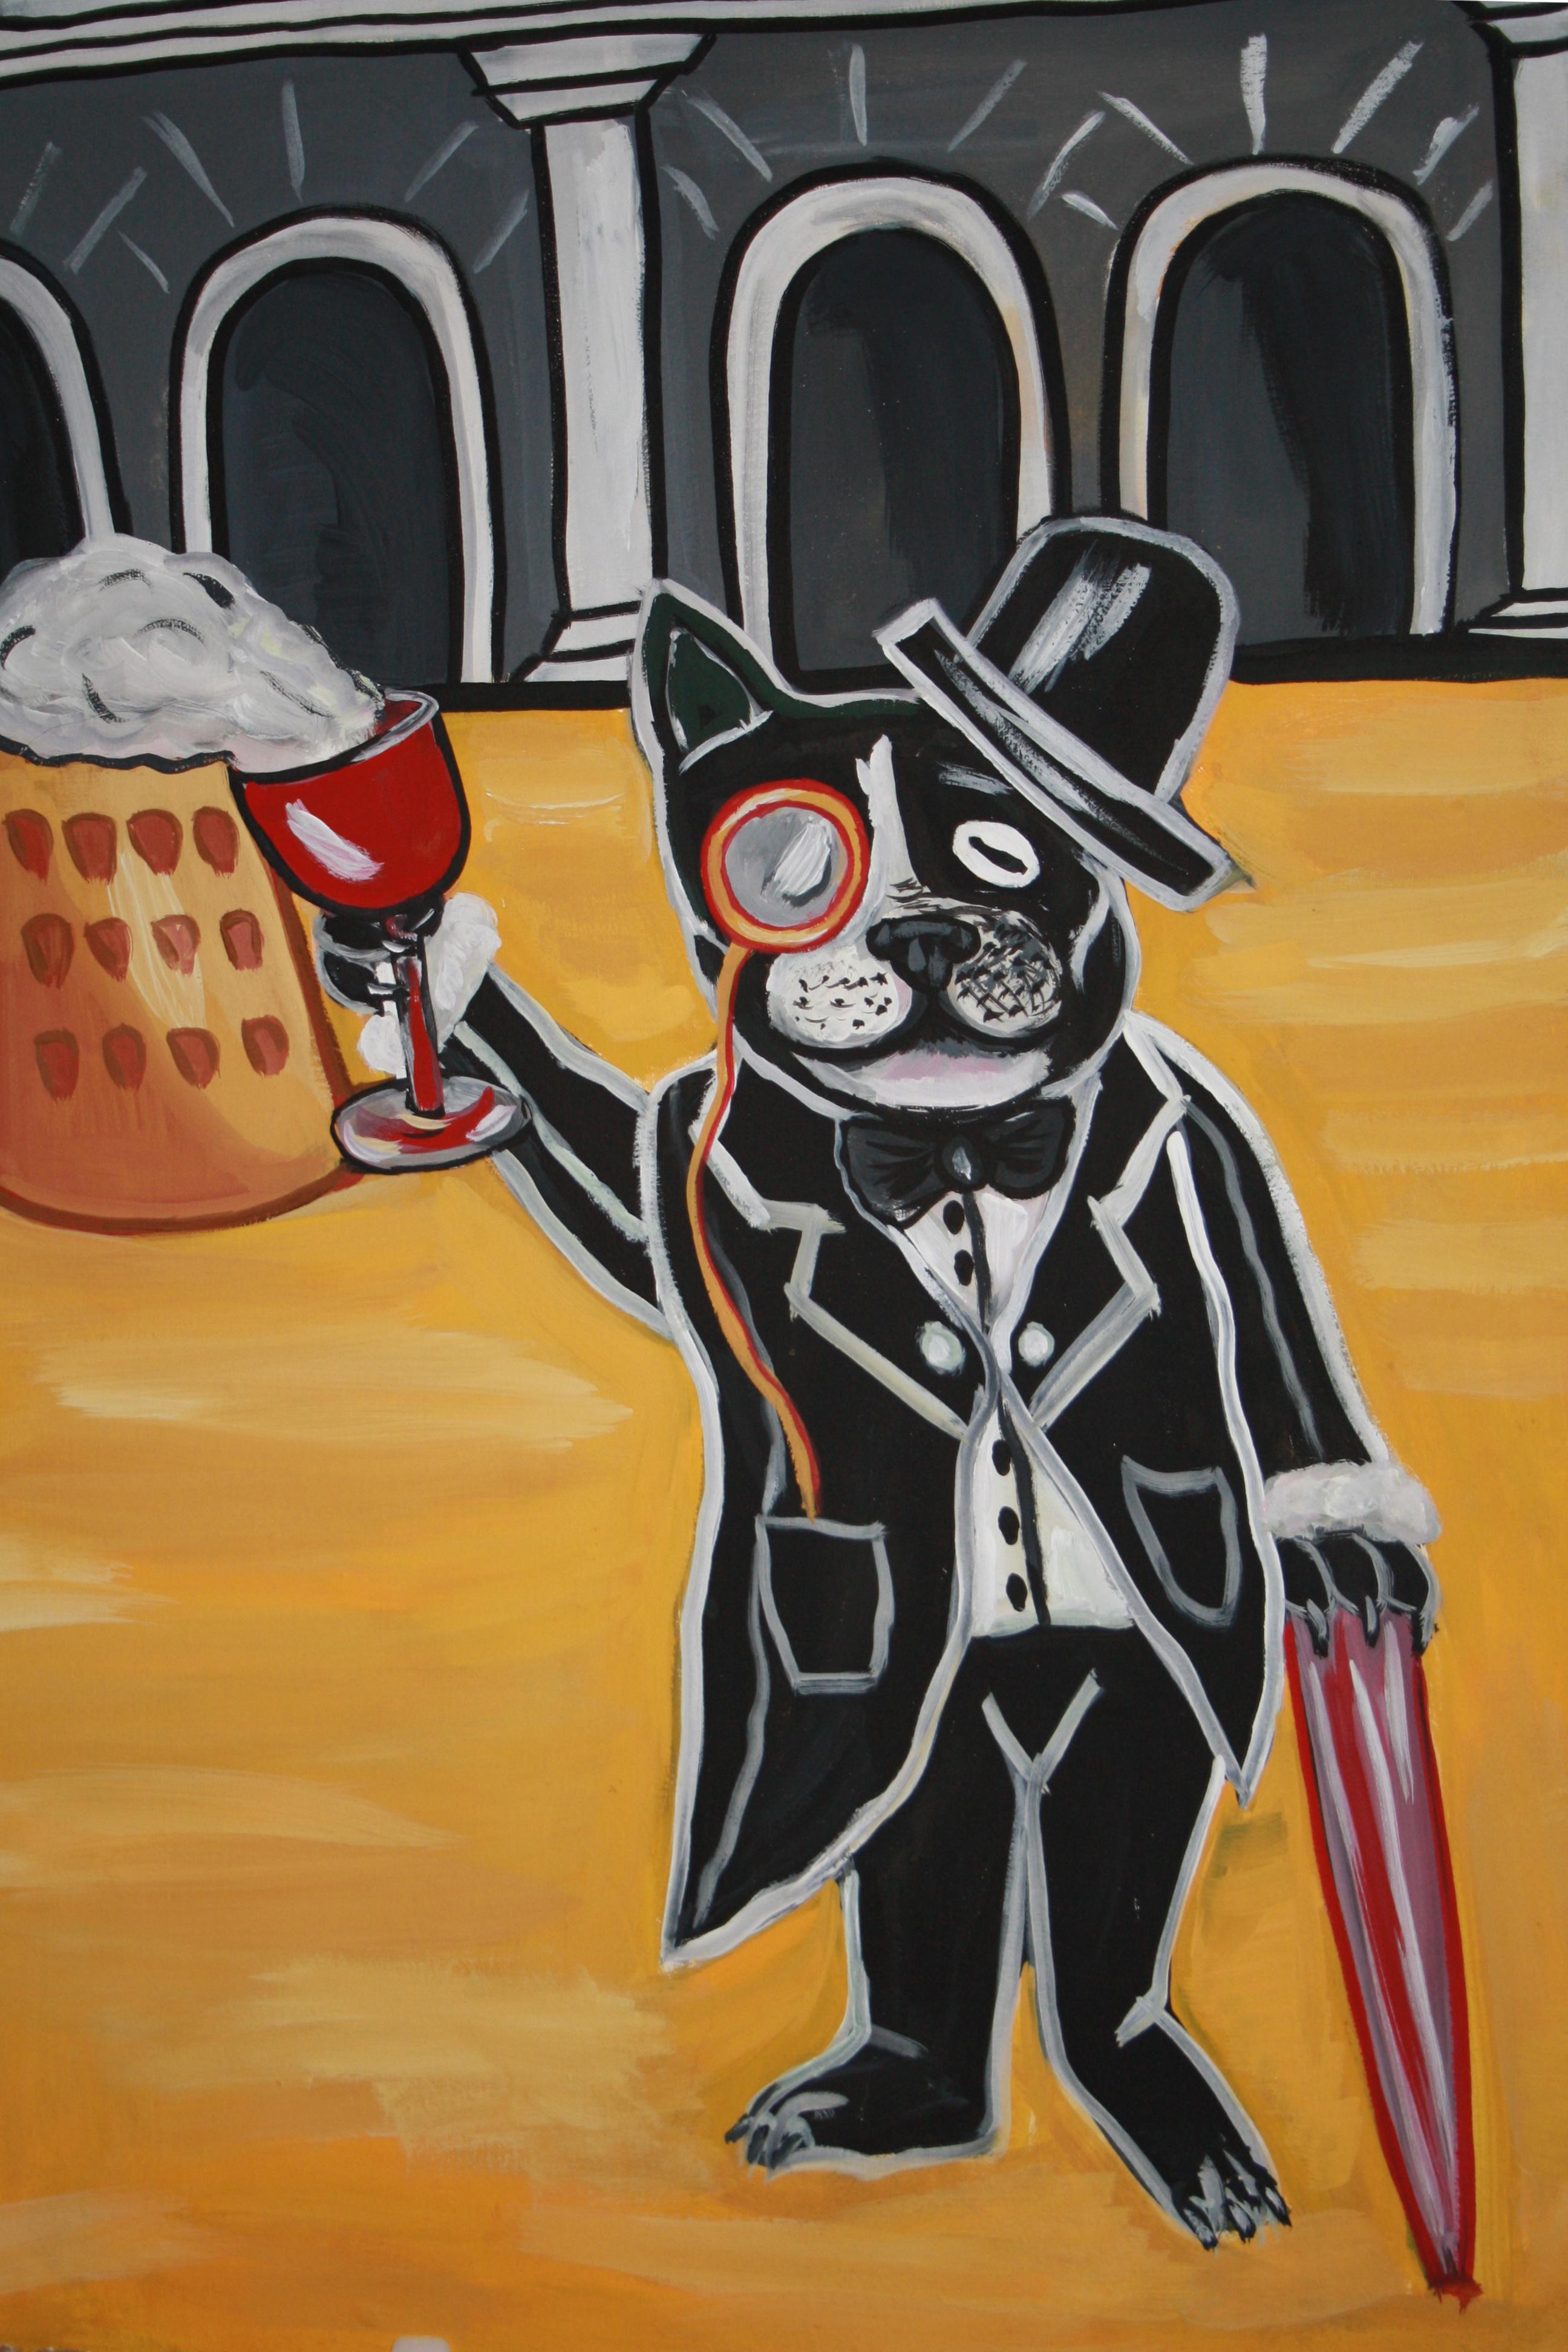 Svejk And The Beer - Painting by Yovana Dimitrova